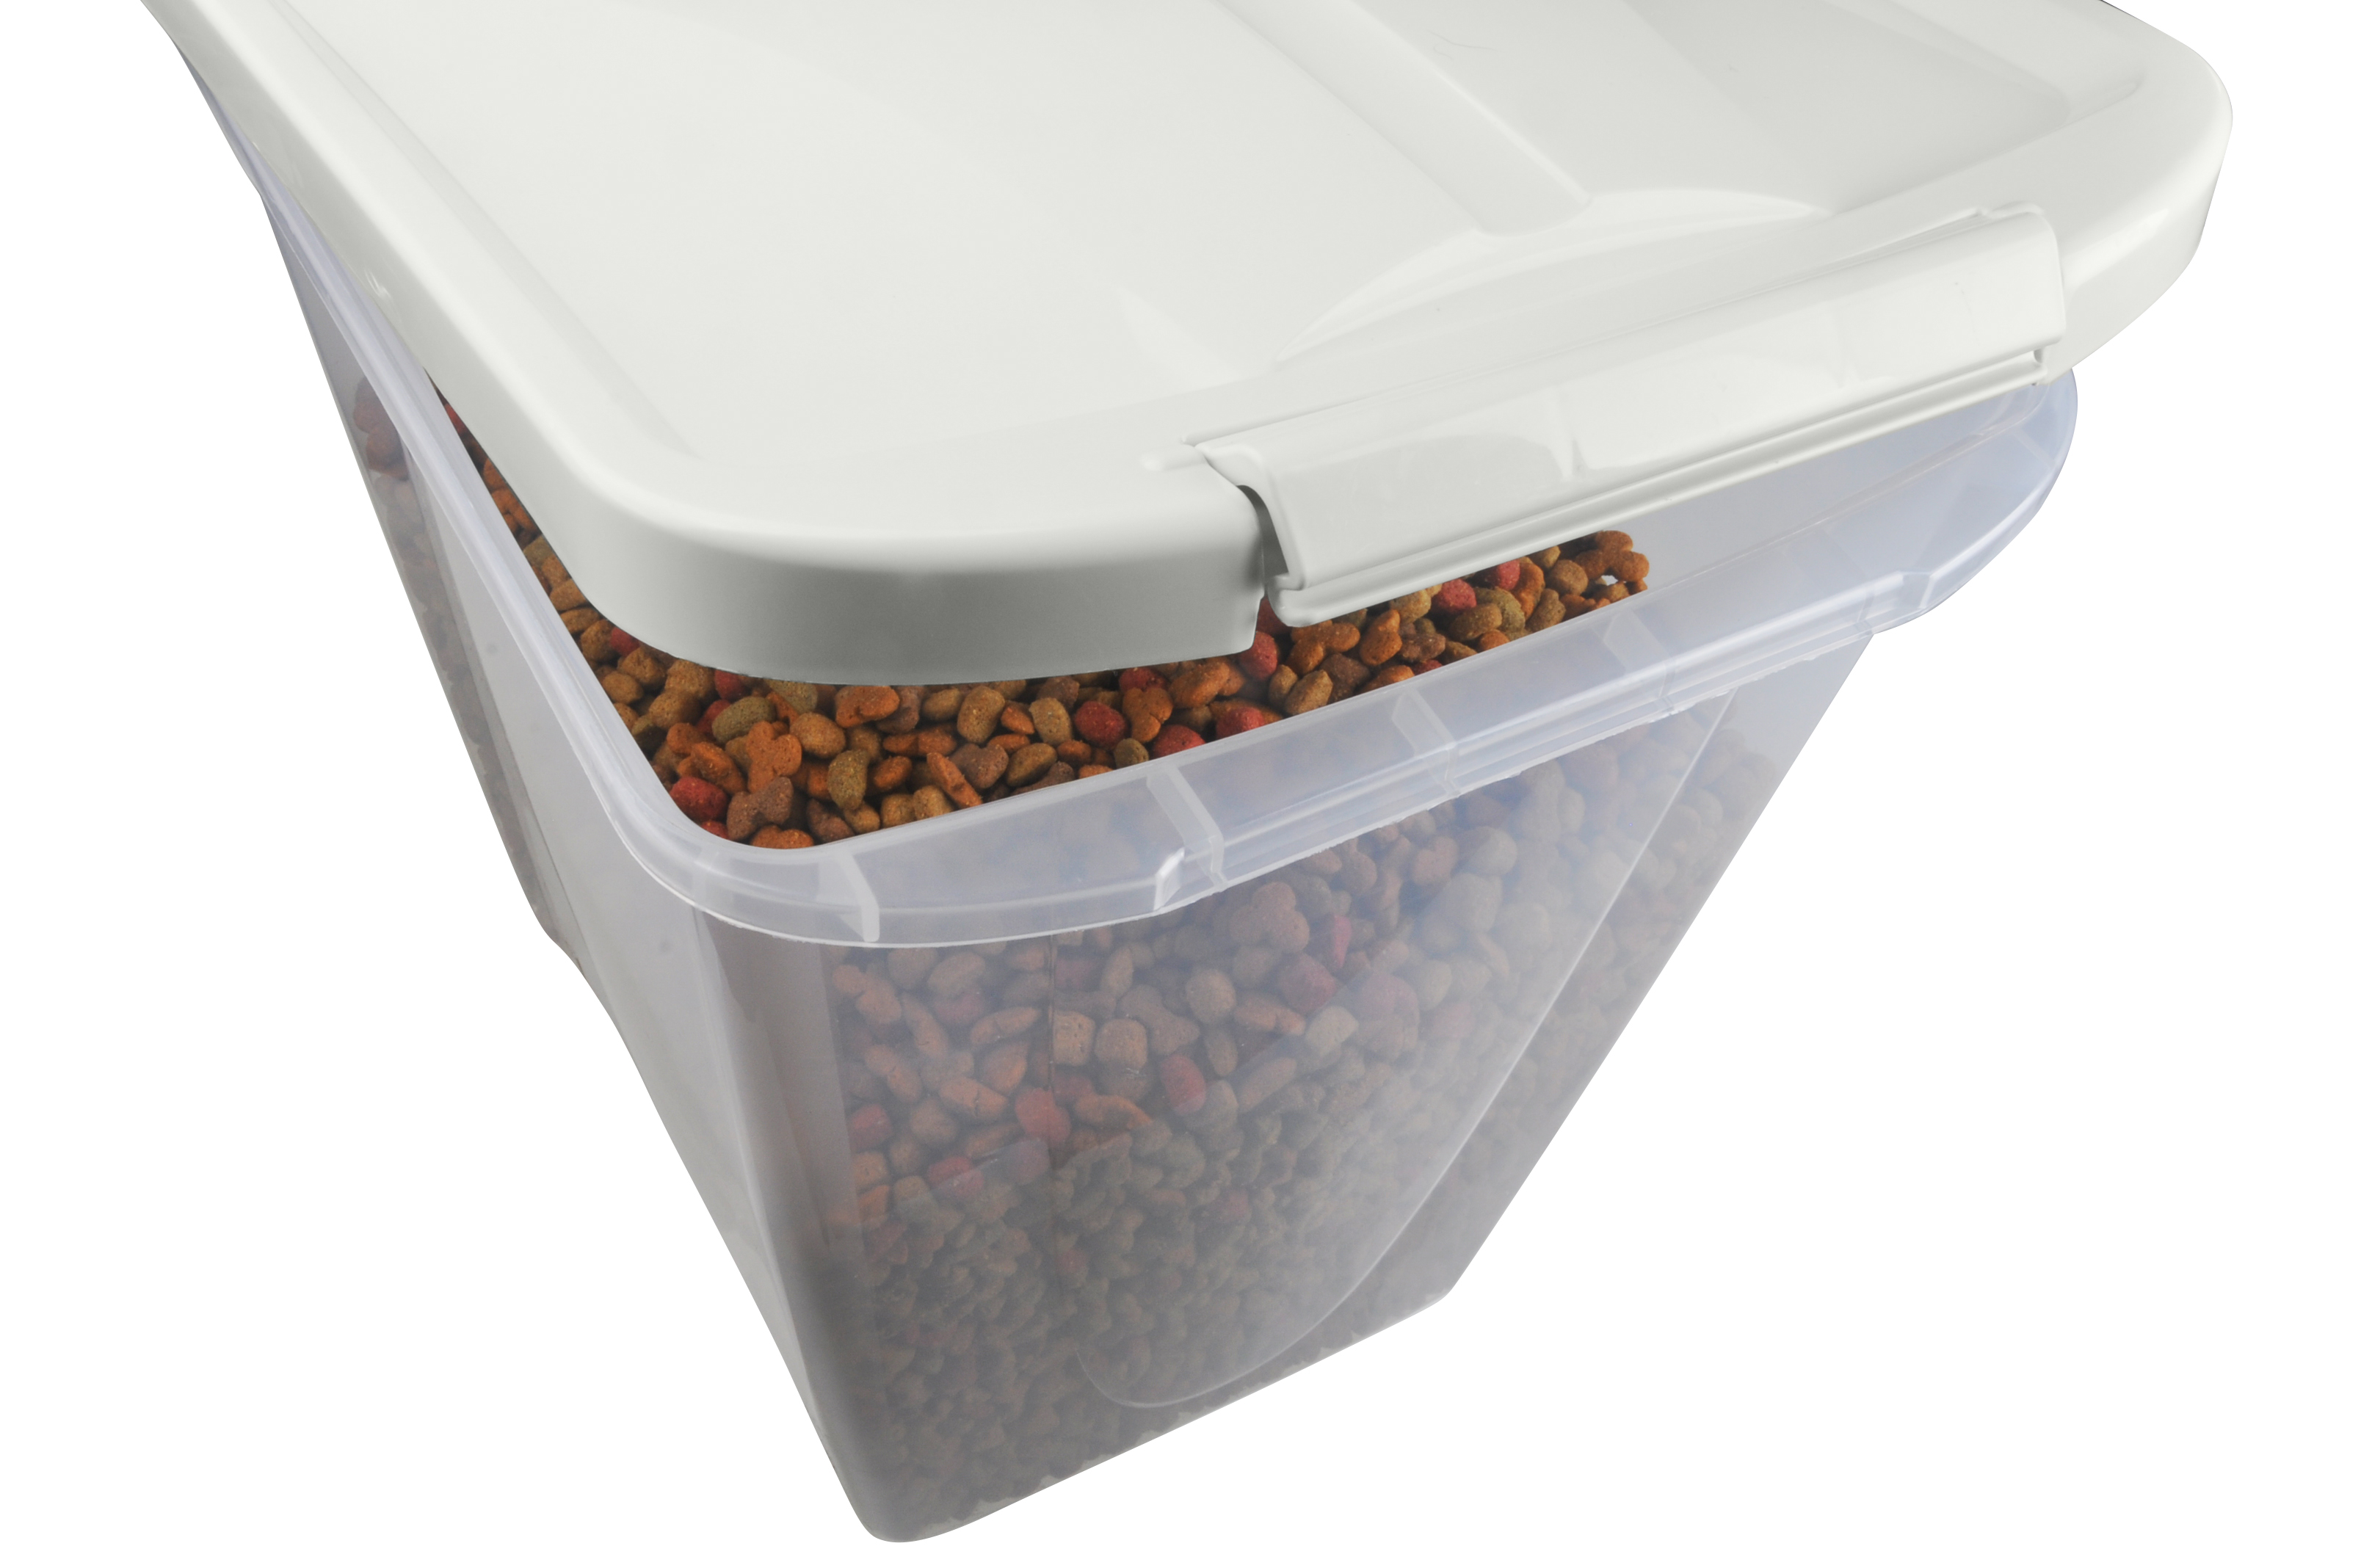 Van Ness 25 lb Dog Food Storage Container on Wheels - image 5 of 8